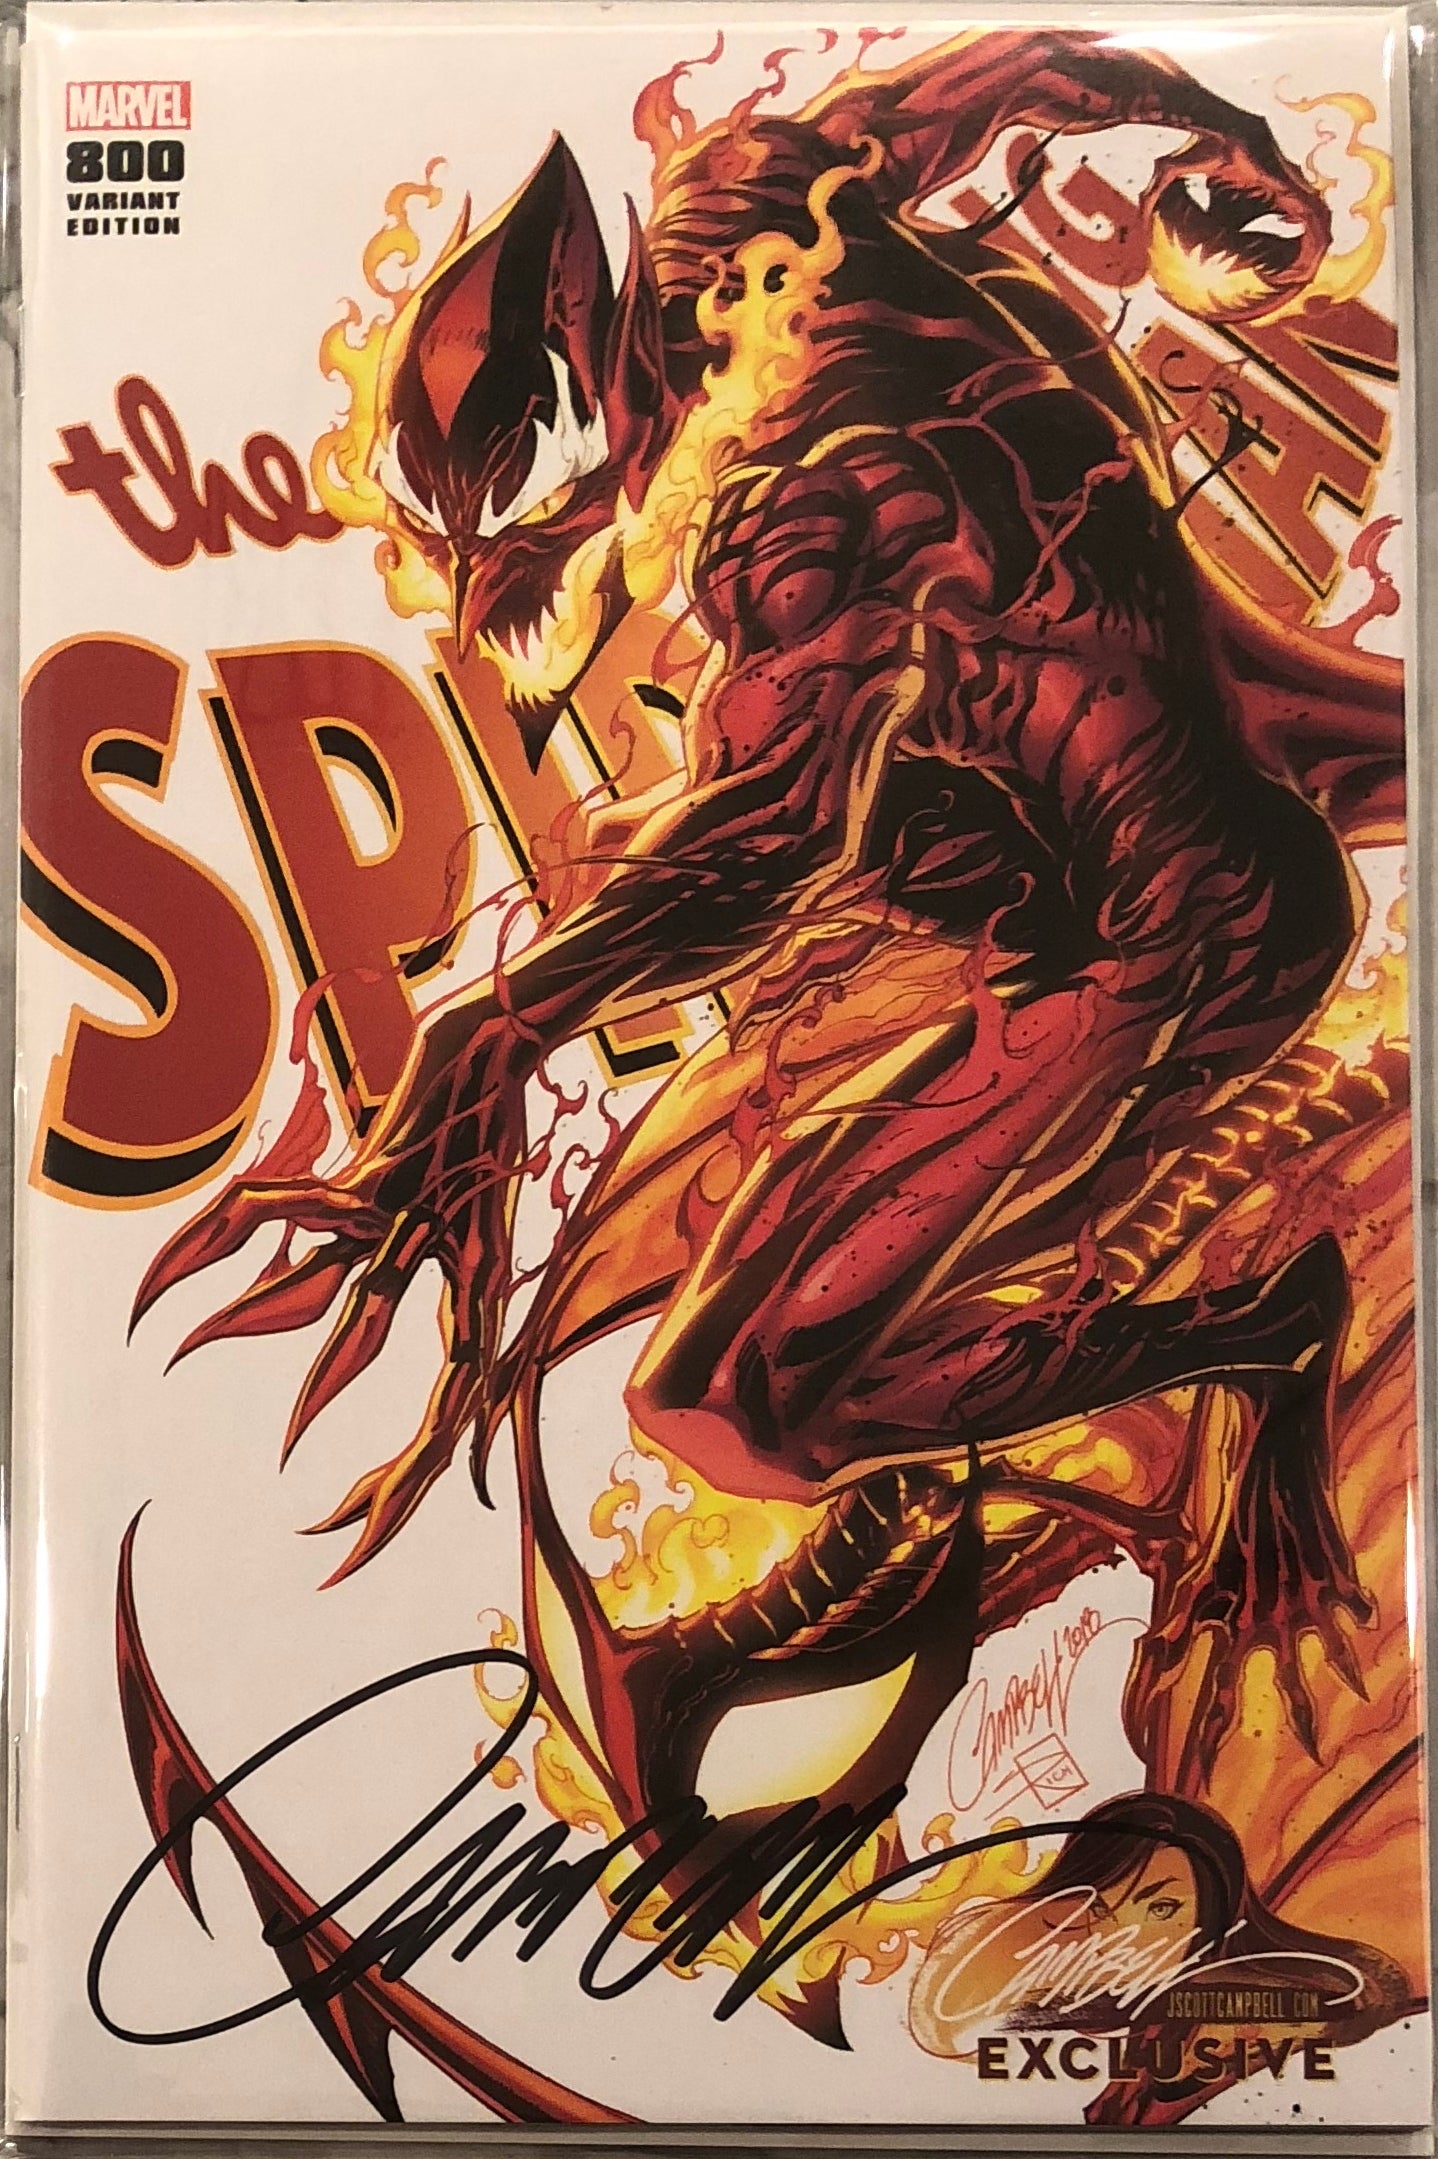 Amazing Spider-Man #800 J. Scott Campbell Edition H "Red Goblin" Exclusive - Signed with COA